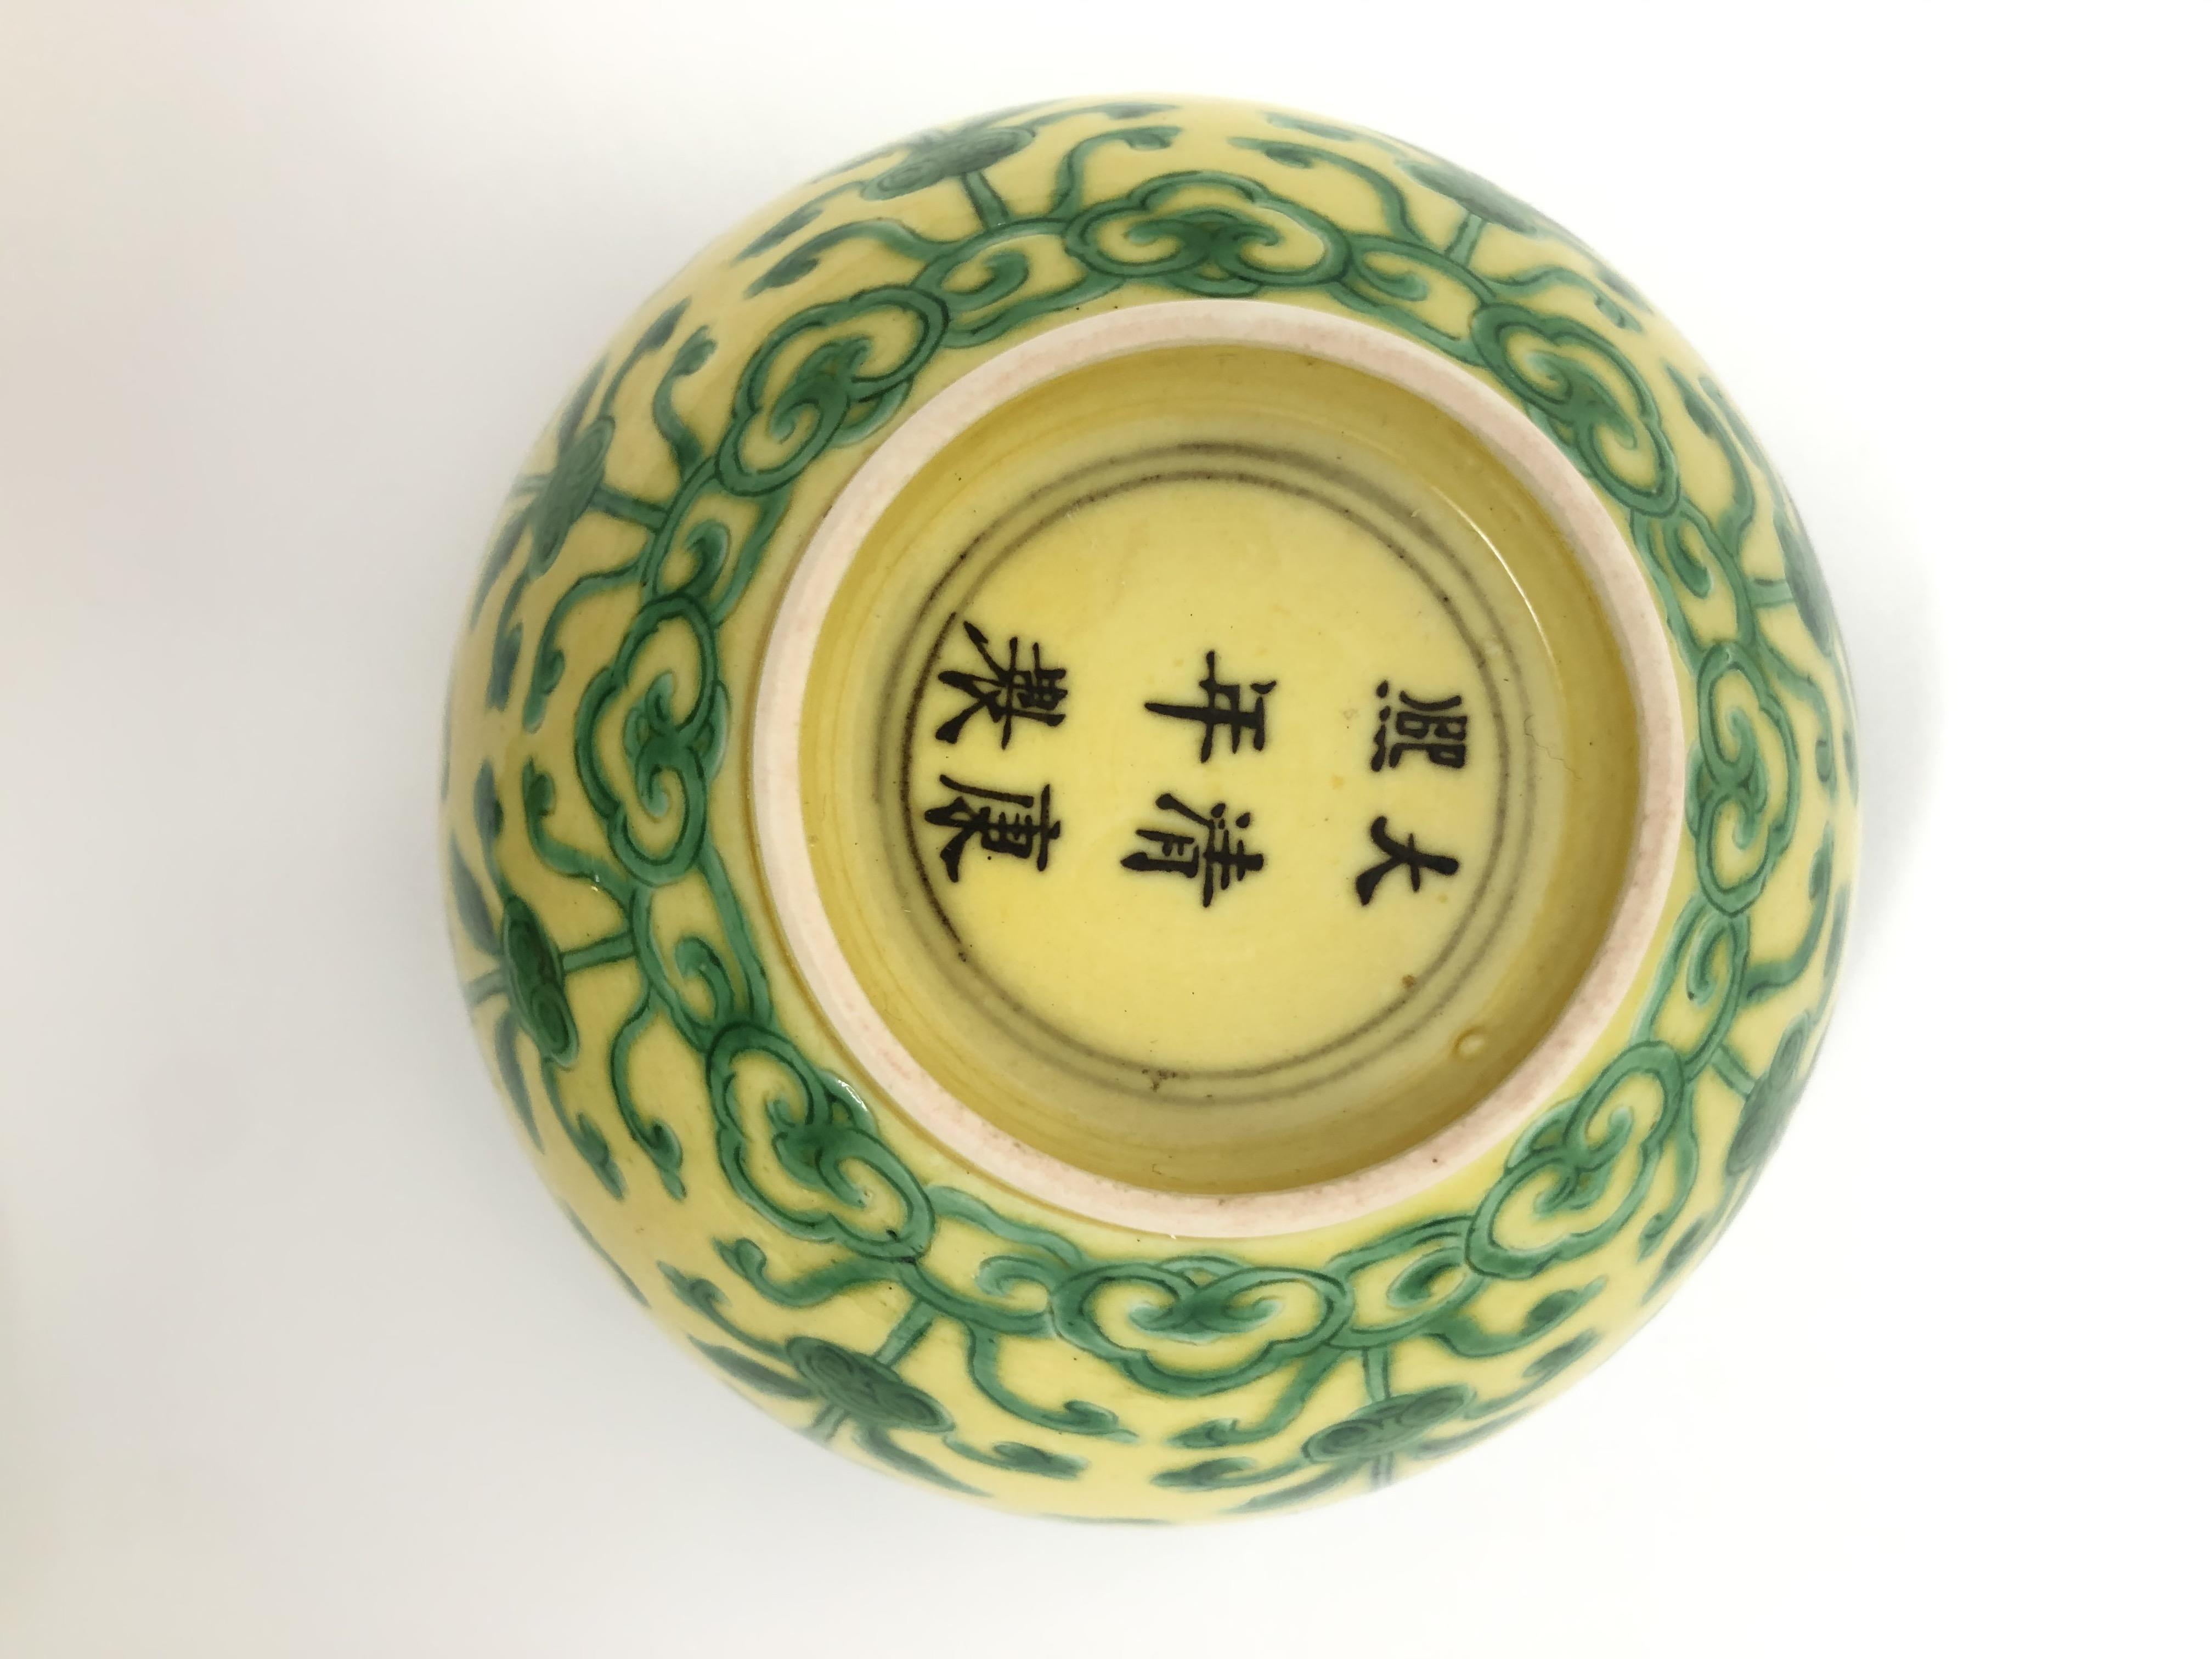 A PAIR OF CHINESE YELLOW AND GREEN 'DRAGON' BOWLS, 20TH CENTURY - Image 8 of 8